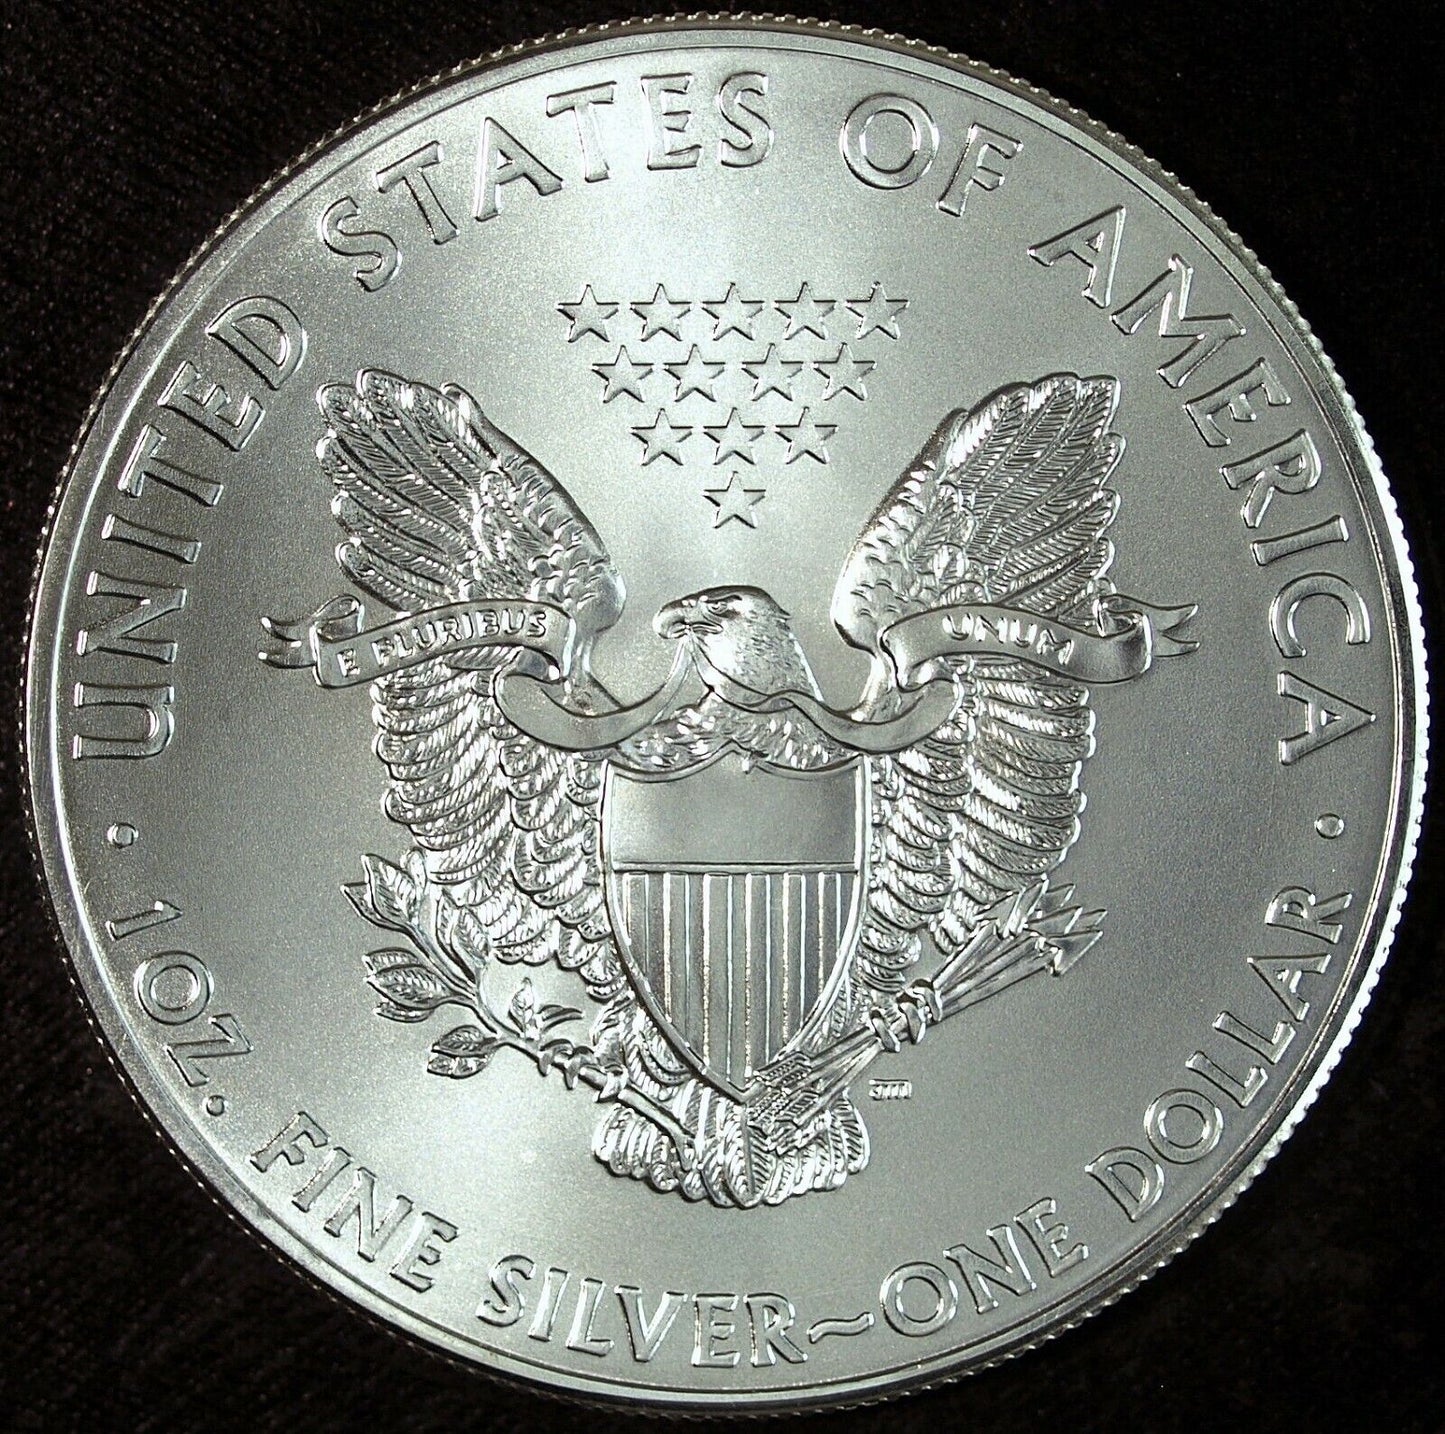 2014 American Silver Eagle ☆☆ Uncirculated ☆☆ Great Collectible 217